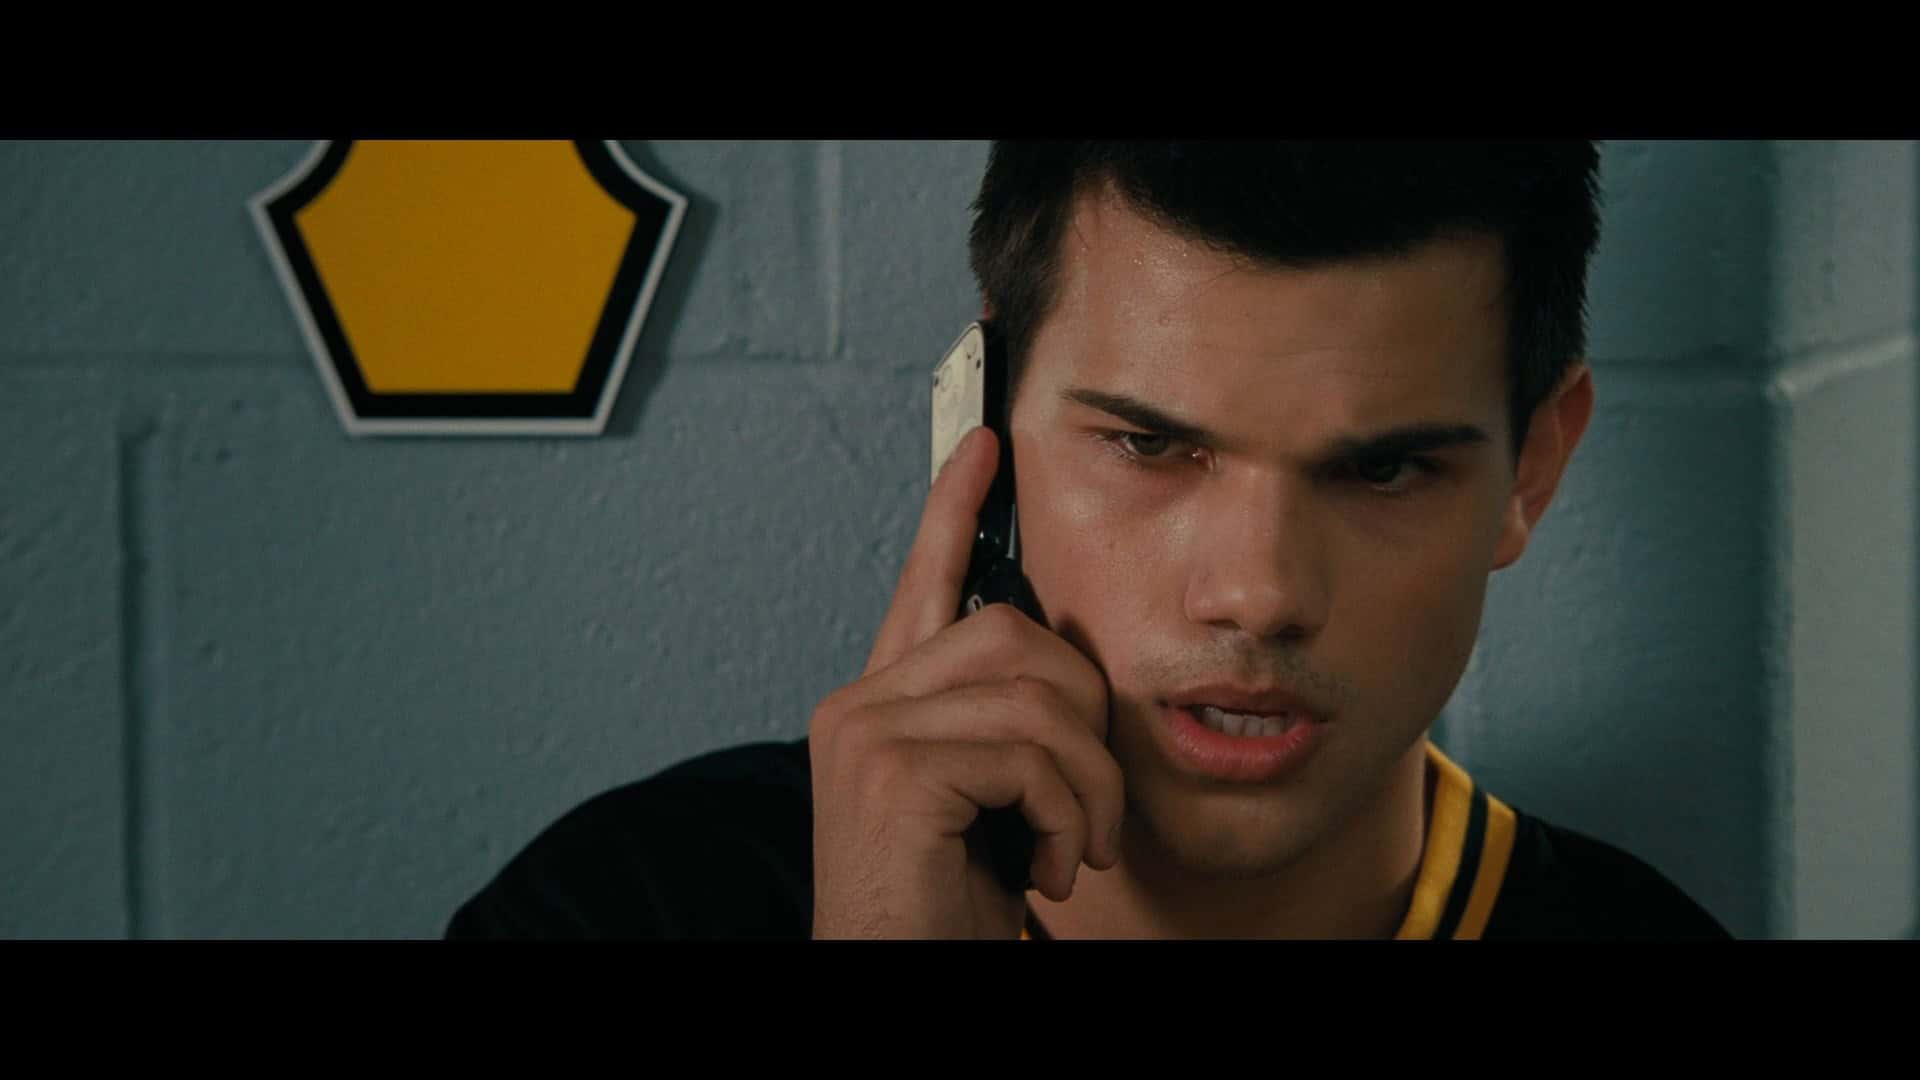 Taylor Lautner in Abduction (2011)